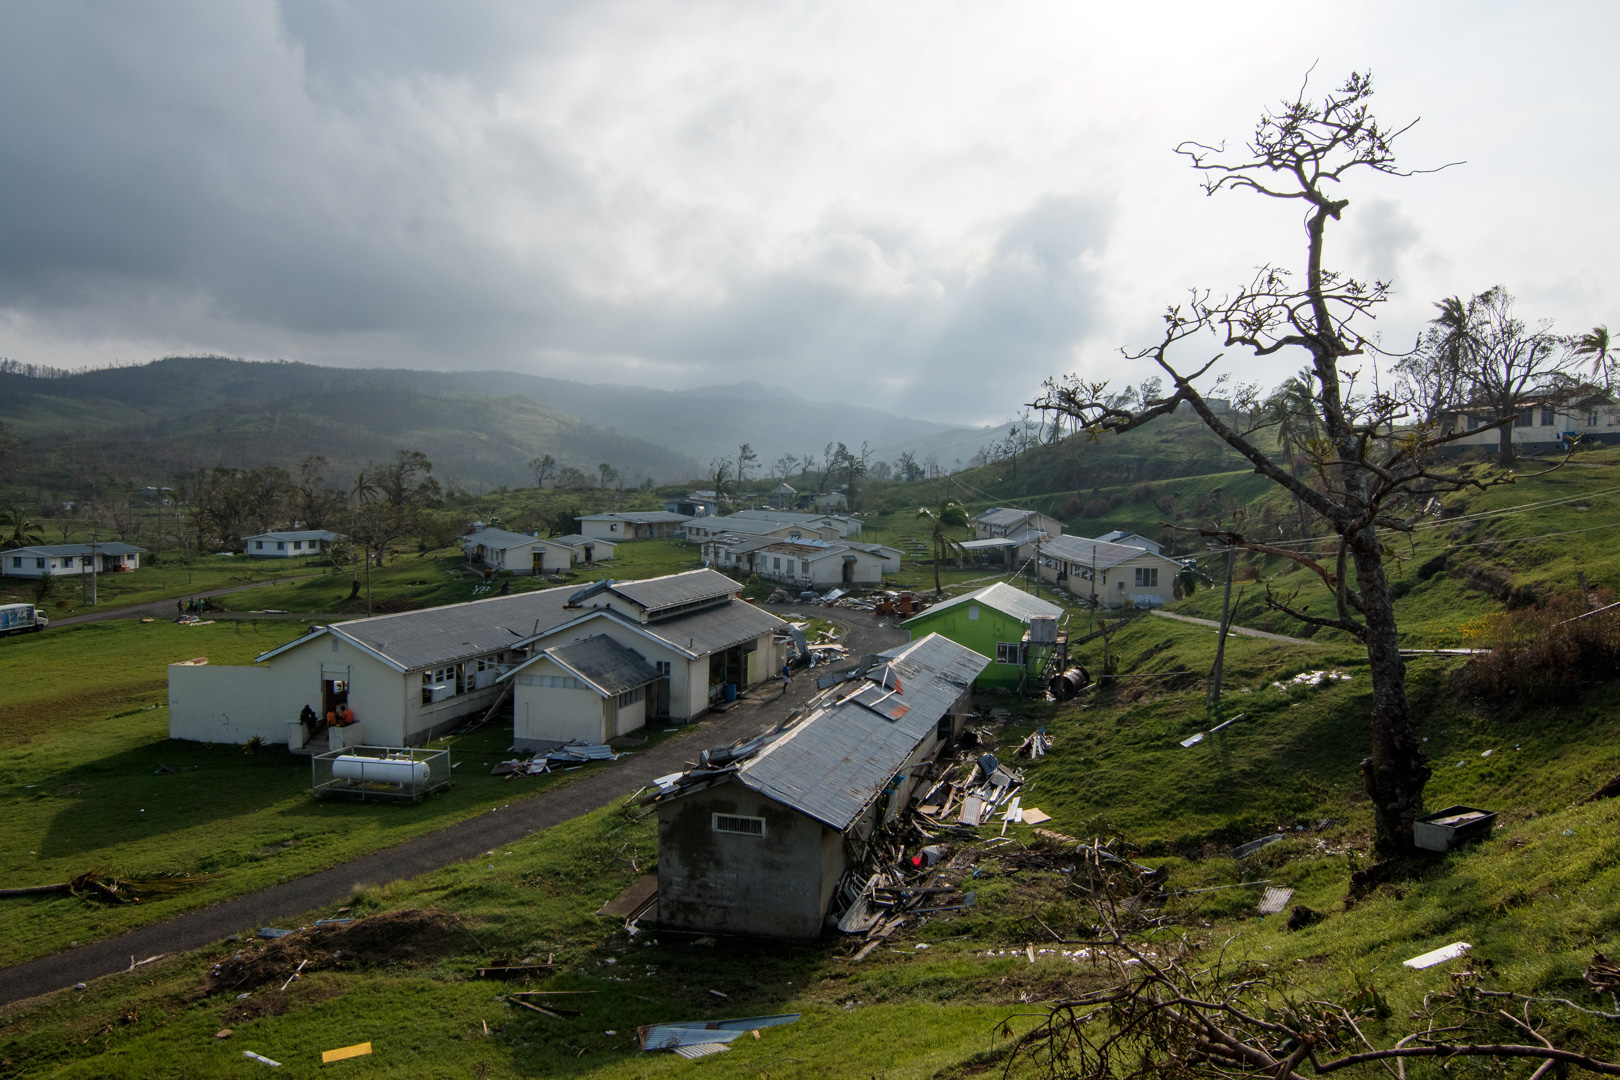  Damage done to the student dormitories of QVS boarding school in Tailevu, Fiji,&nbsp;after Cyclone Winston swept through the area on February 20, 2016. 